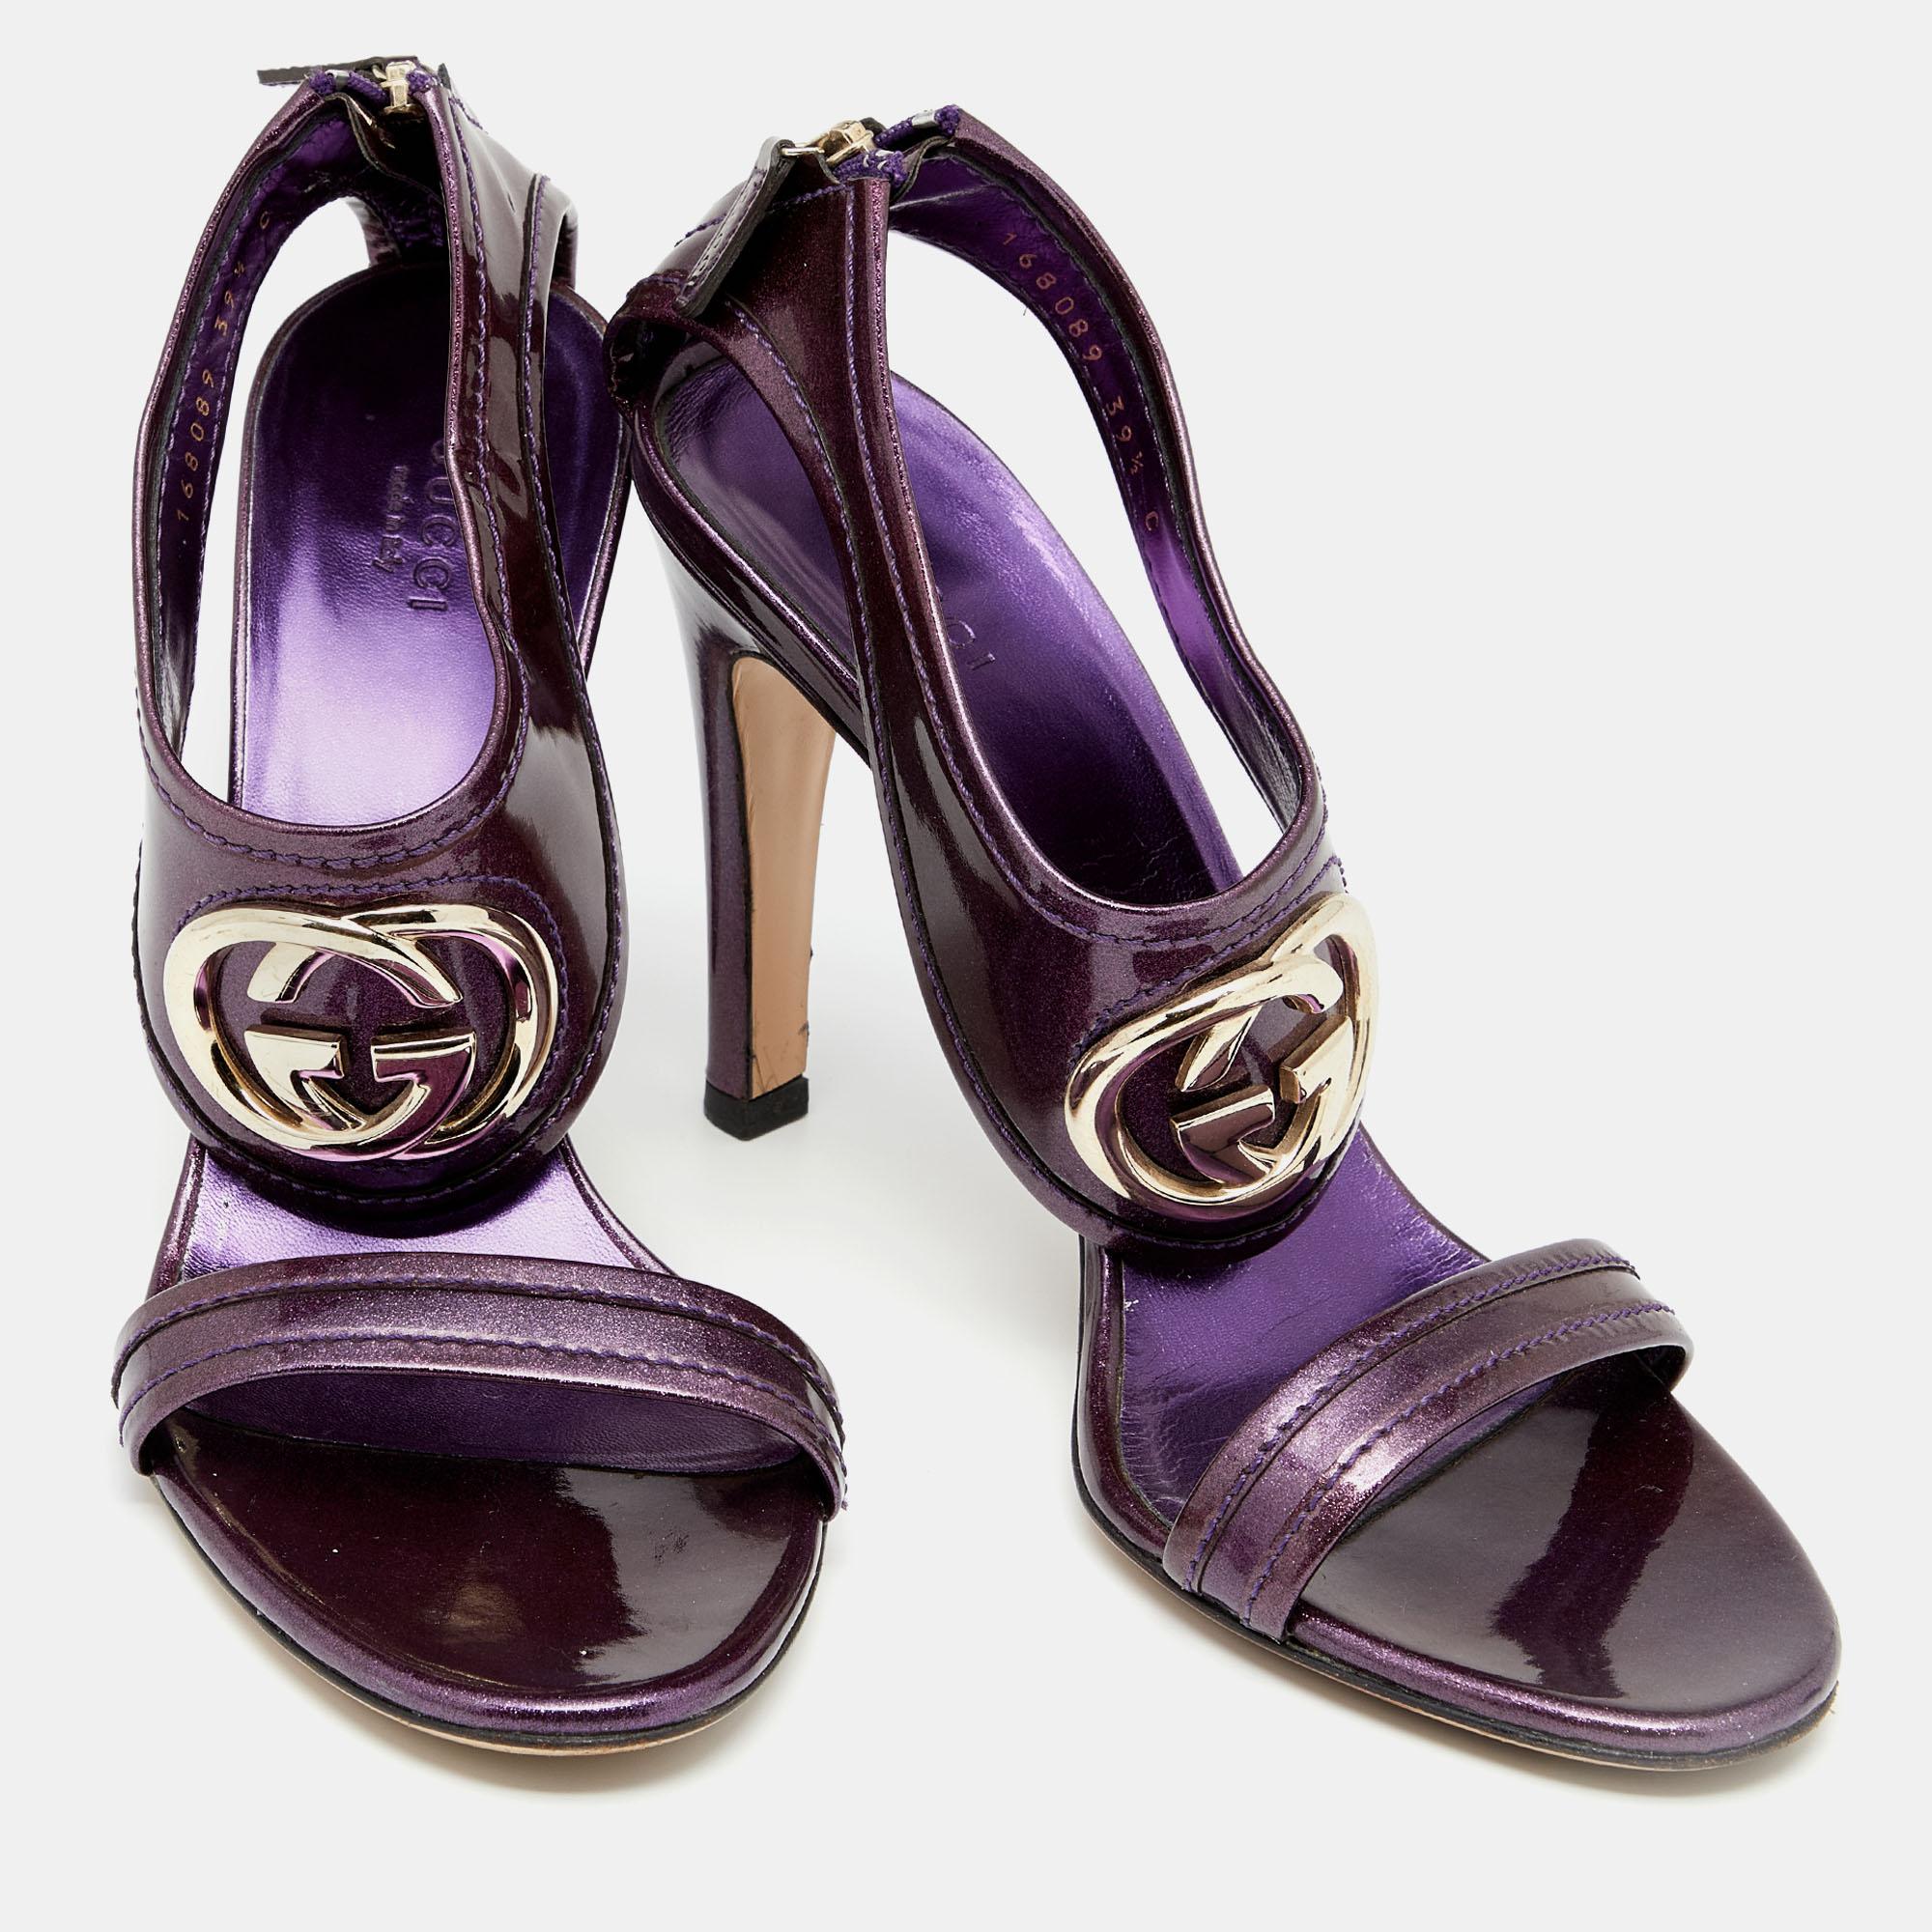 Gray Gucci Purple Speckling Patent Leather Interlocking G Ankle Strap Sandals Size 39